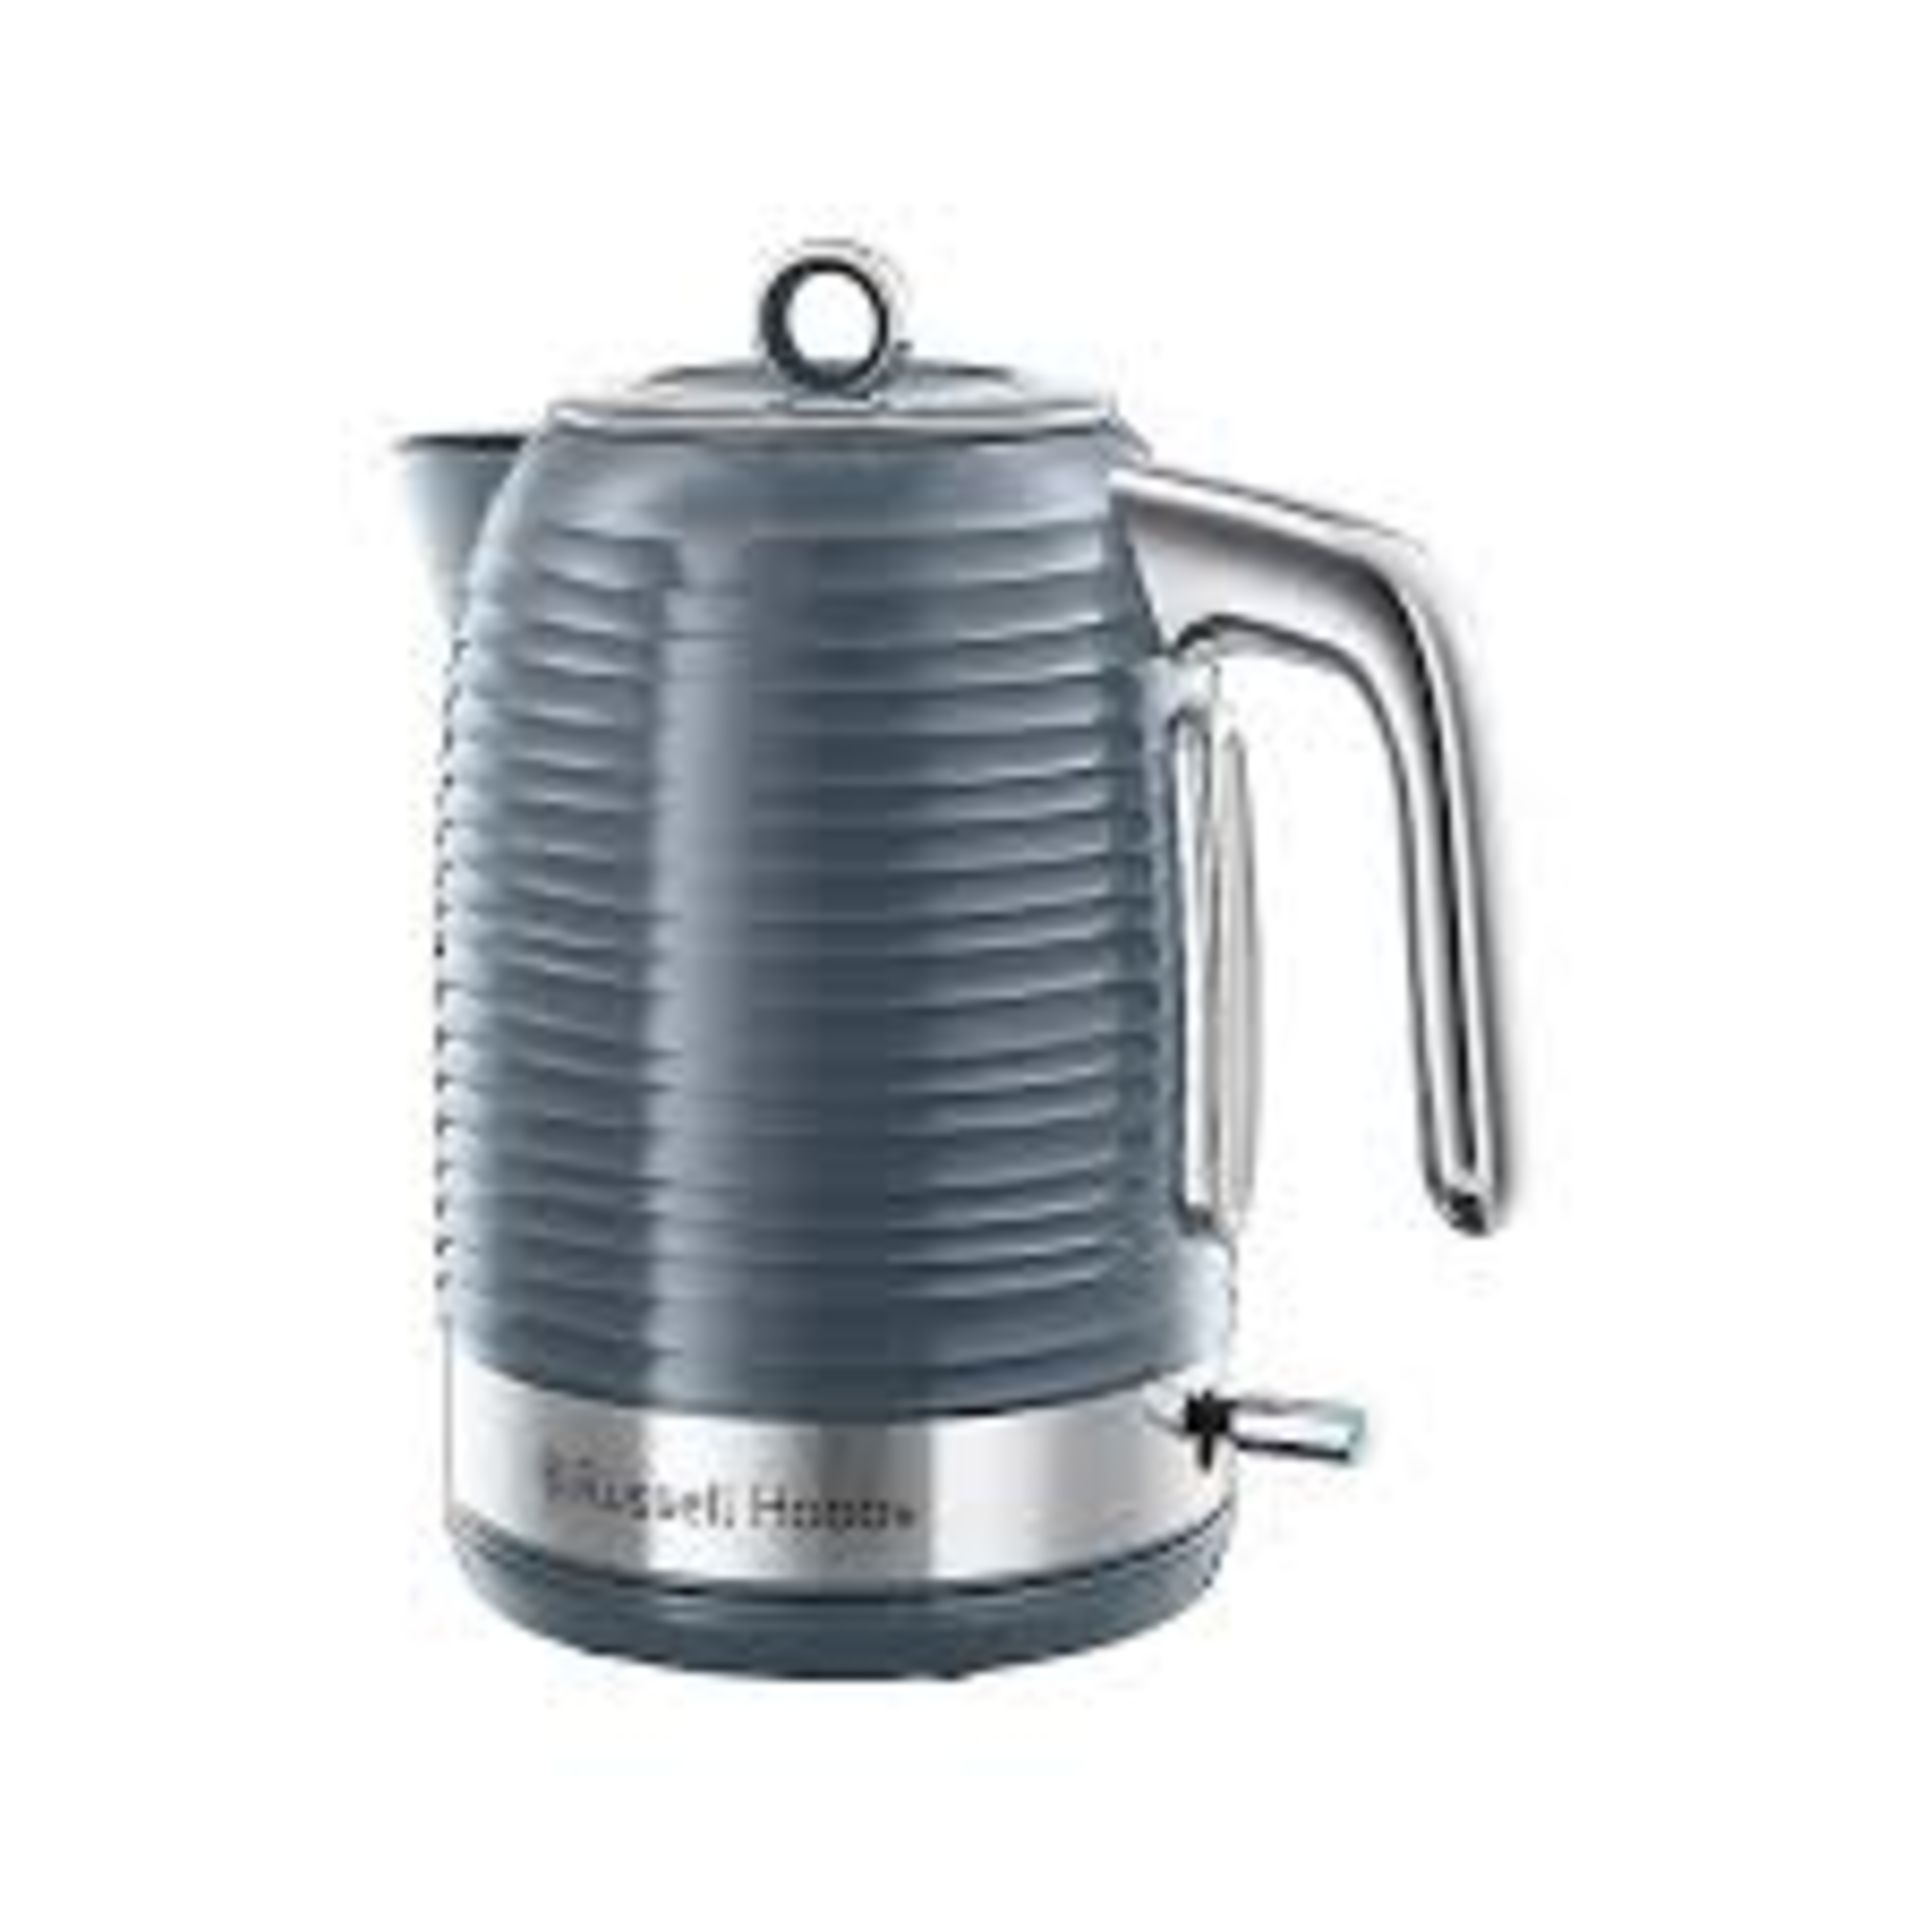 dRussell Hobbs Inspire Grey Kettle. - P4. If you’re looking to add a touch of uniqueness to your